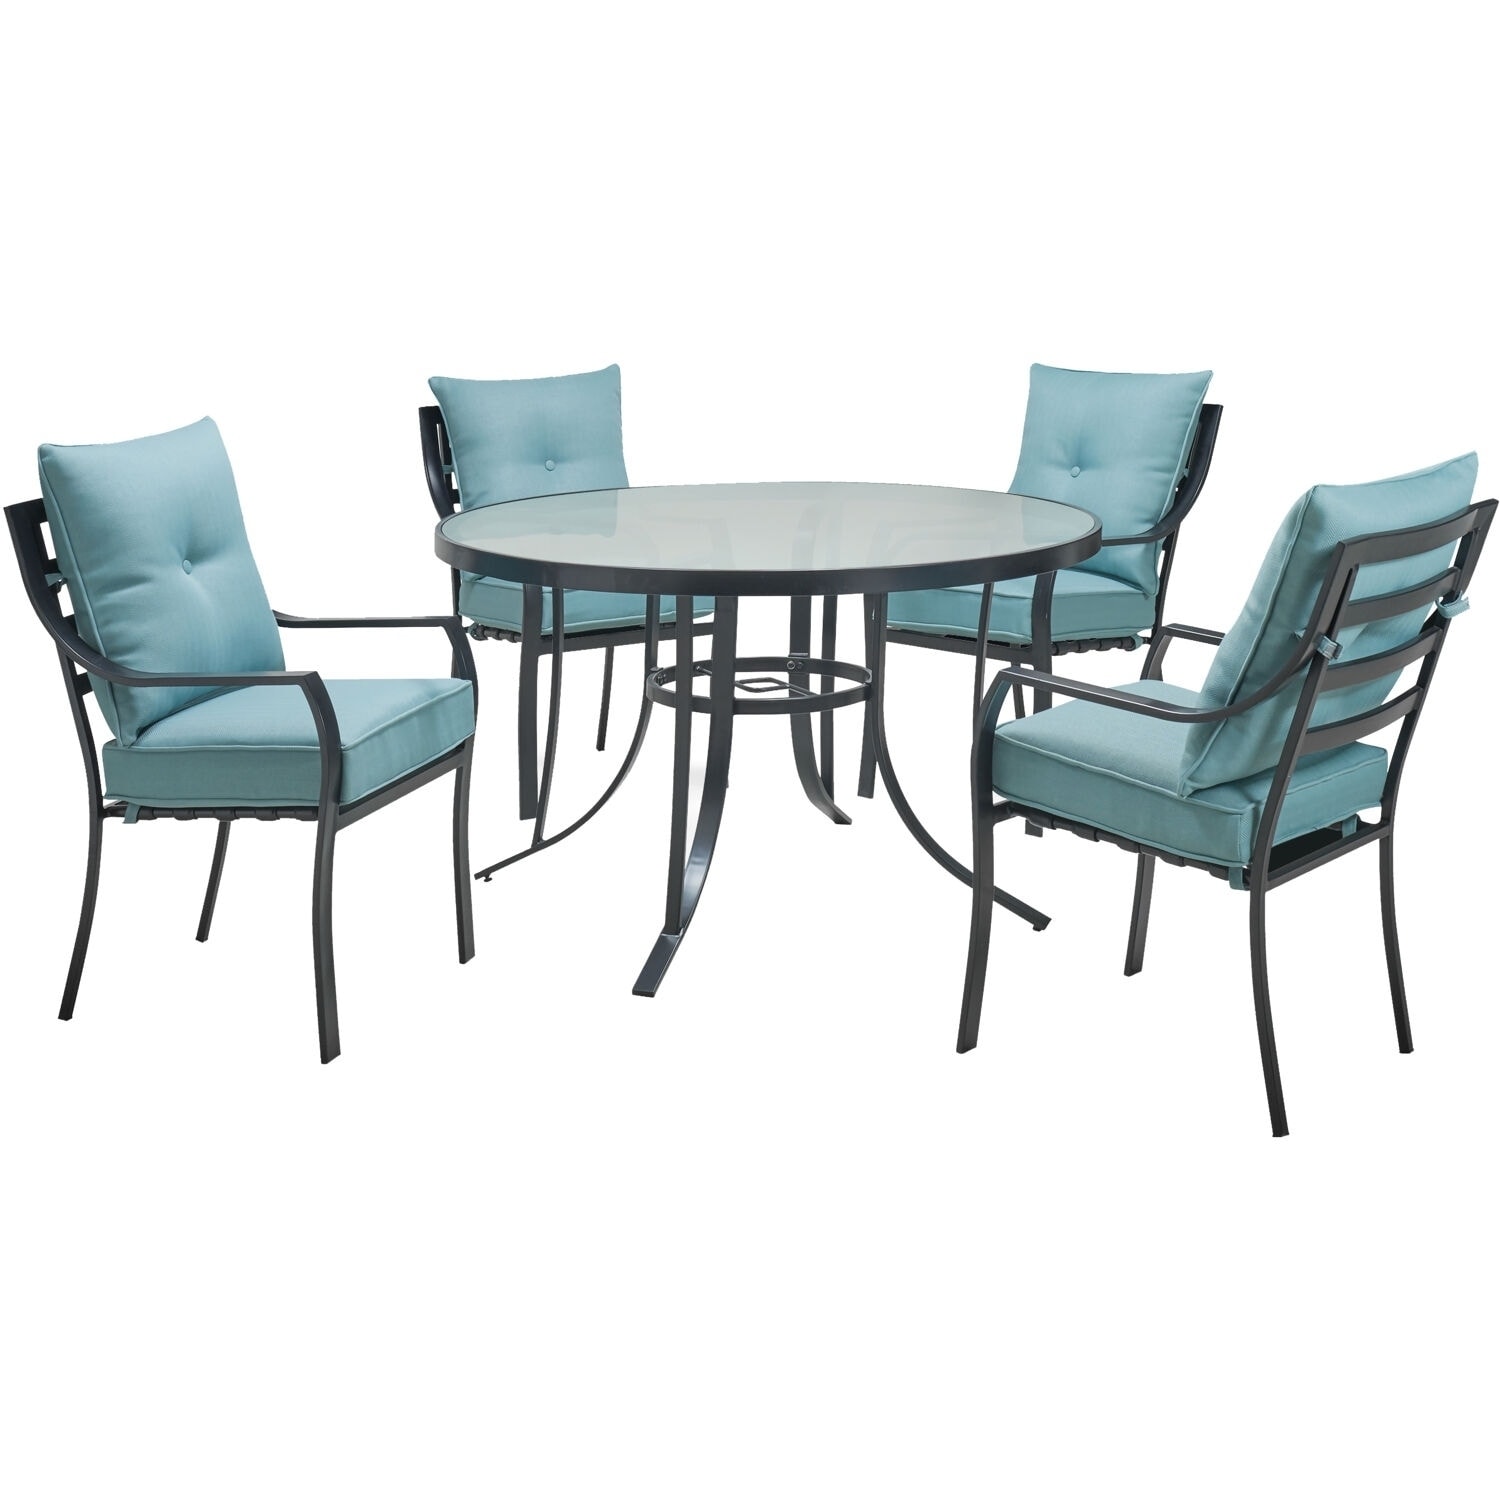 hanover lavallette 5piece dining set in ocean blue with 4 stationary  chairs and a 52in round glasstop table